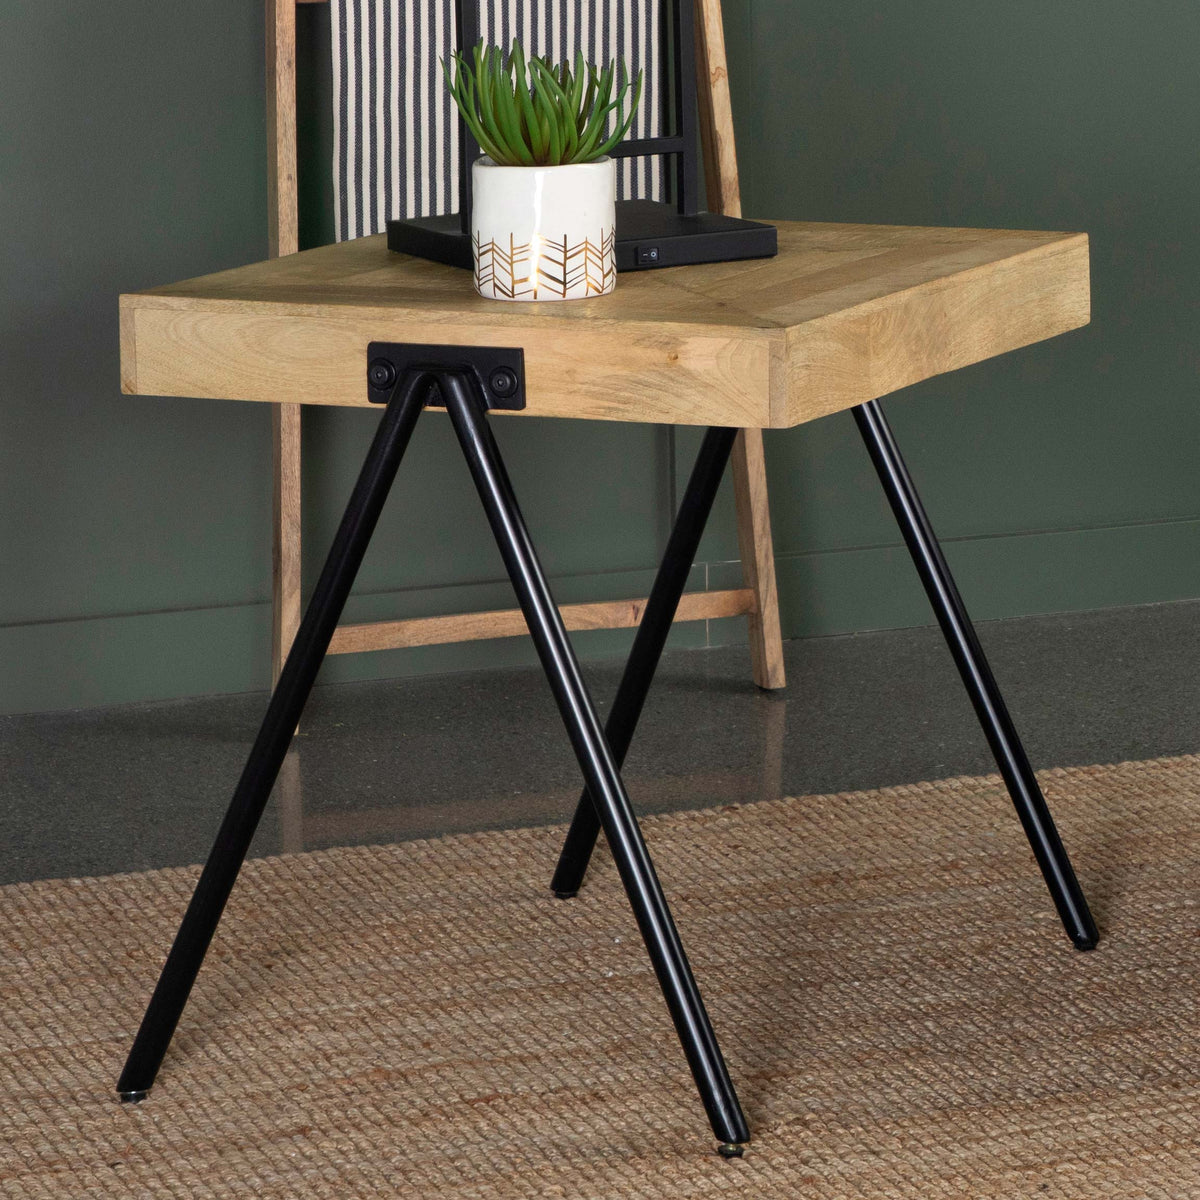 Avery Square End Table with Metal Legs Natural and Black Avery Square End Table with Metal Legs Natural and Black Half Price Furniture